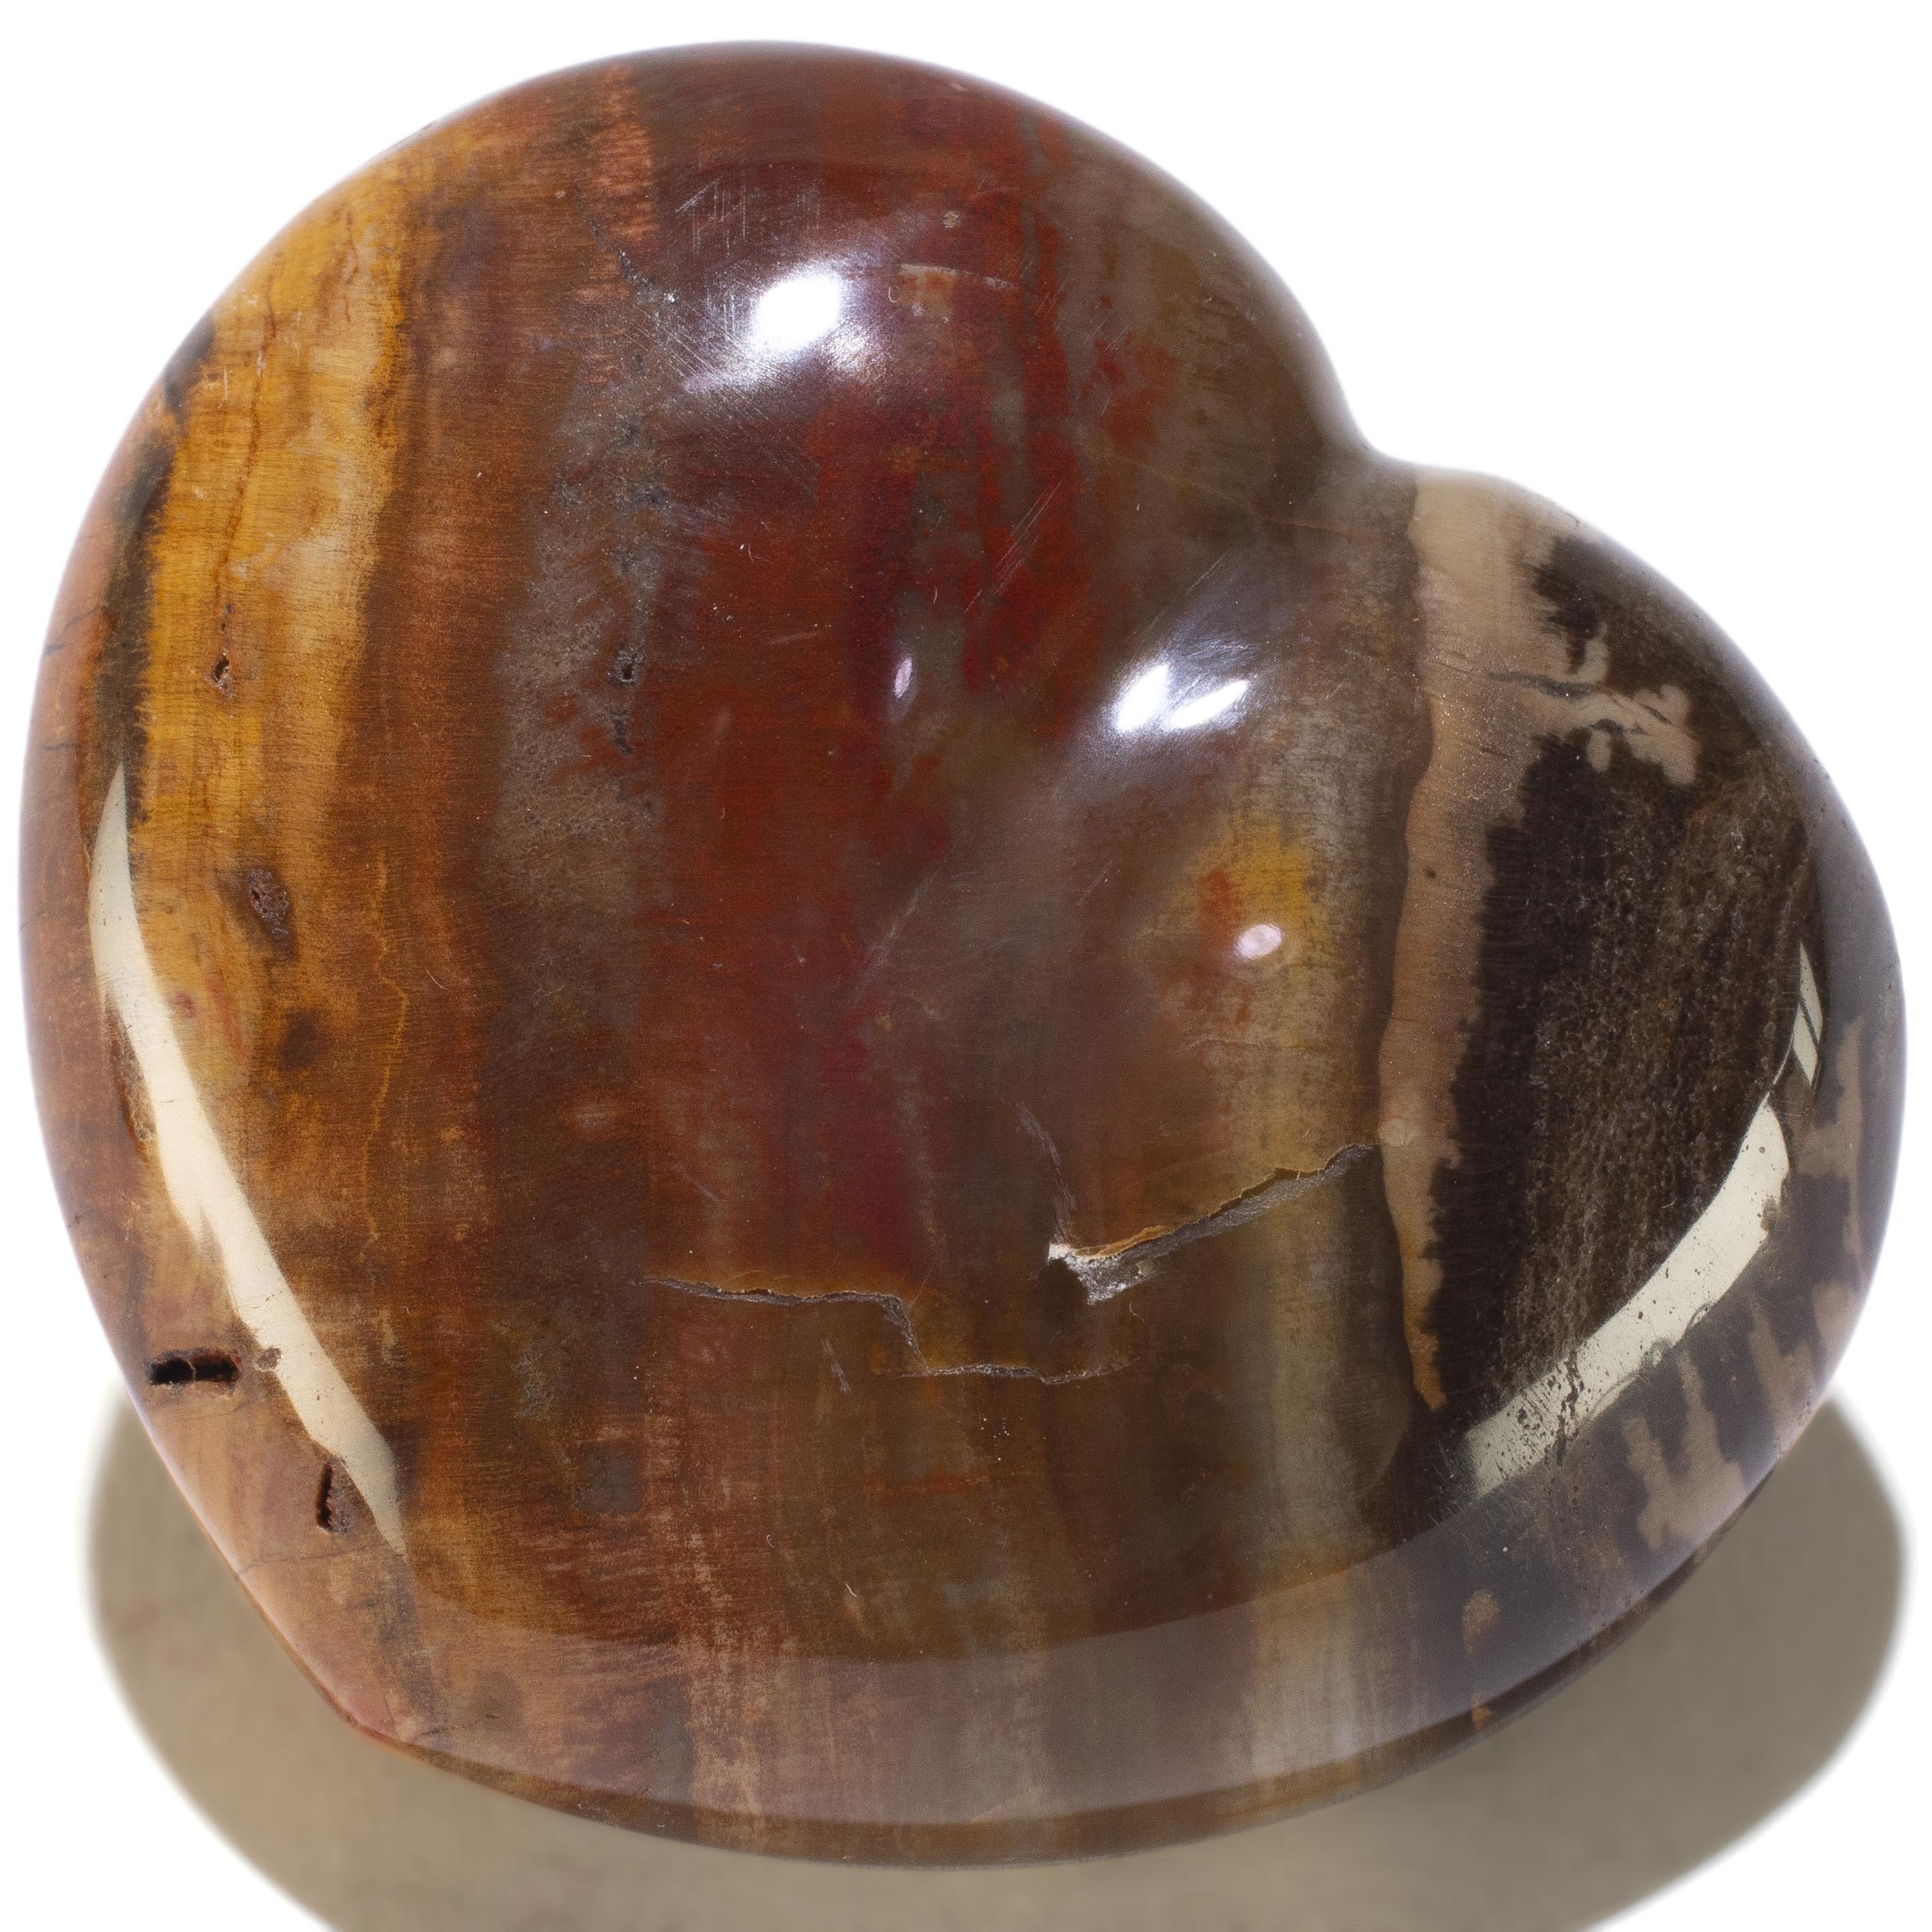 KALIFANO Petrified Wood Petrified Wood Gemstone Heart Carving 170g / 3in. GH200-PW